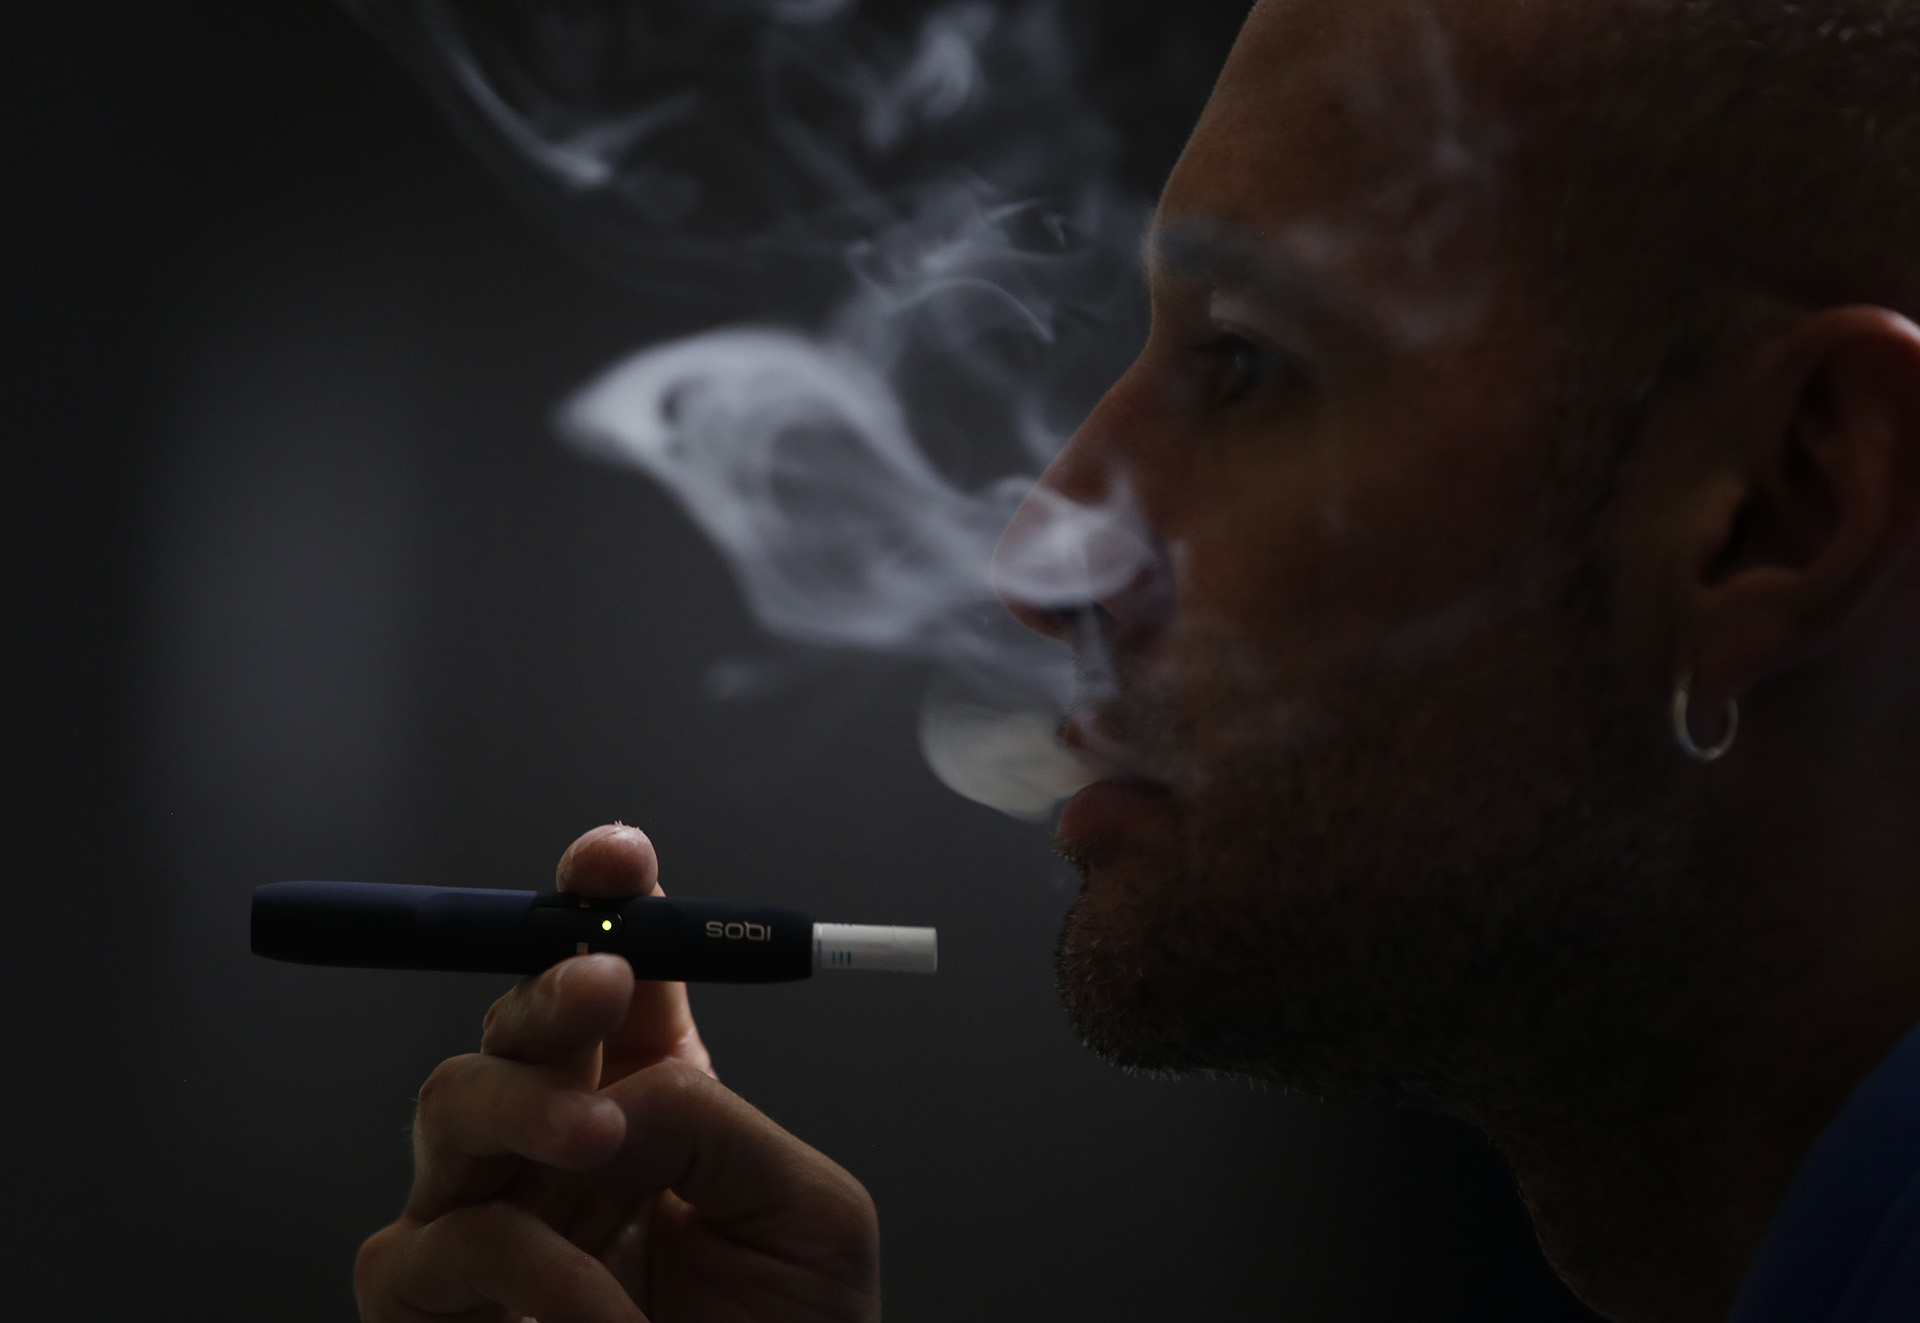 Students hospitalized due to e-cigarettes in Hanoi